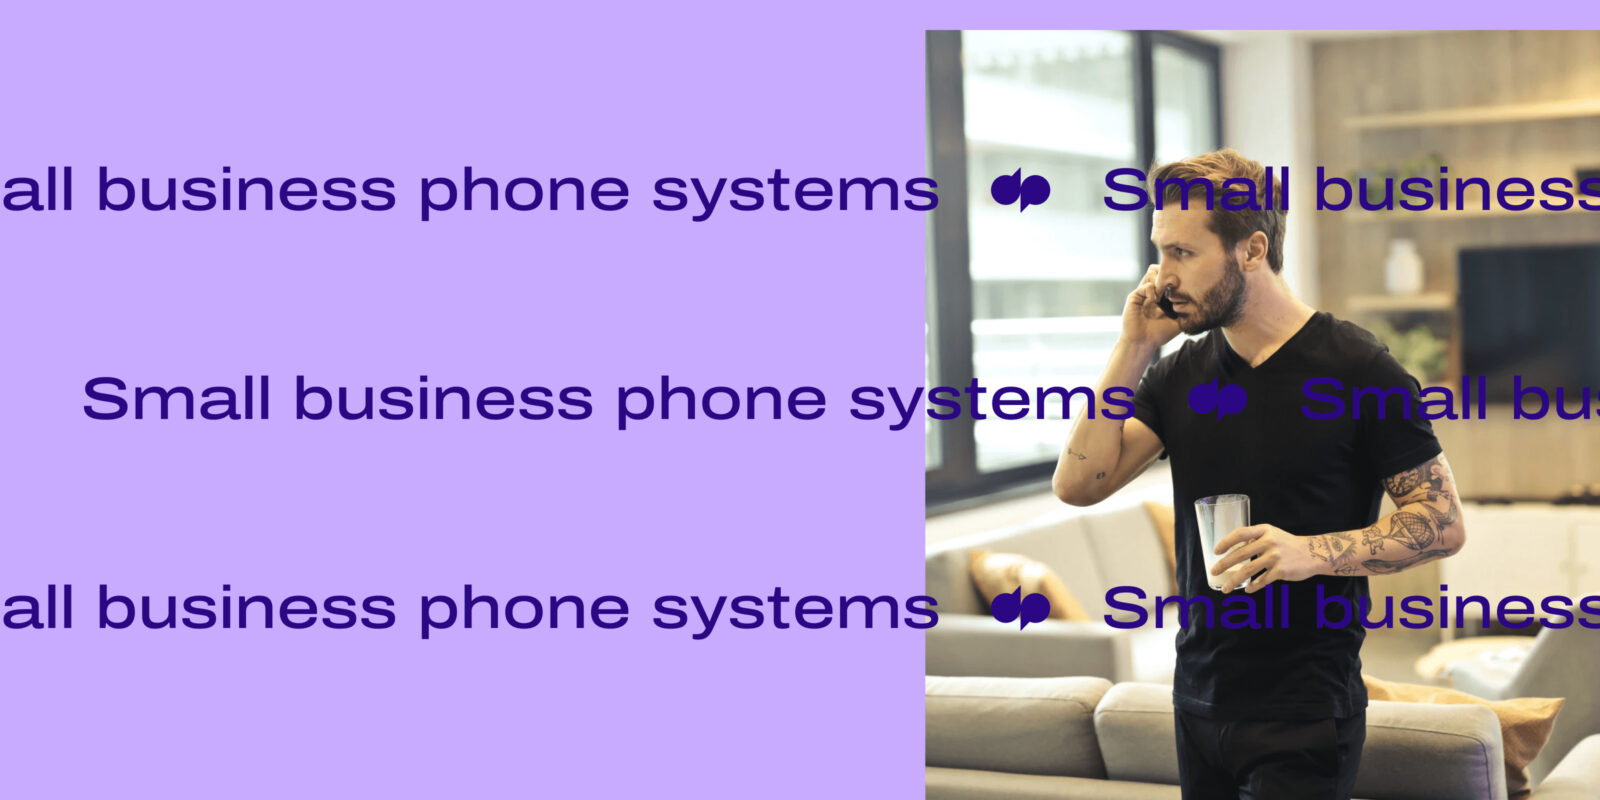 4 Small business phone systems header